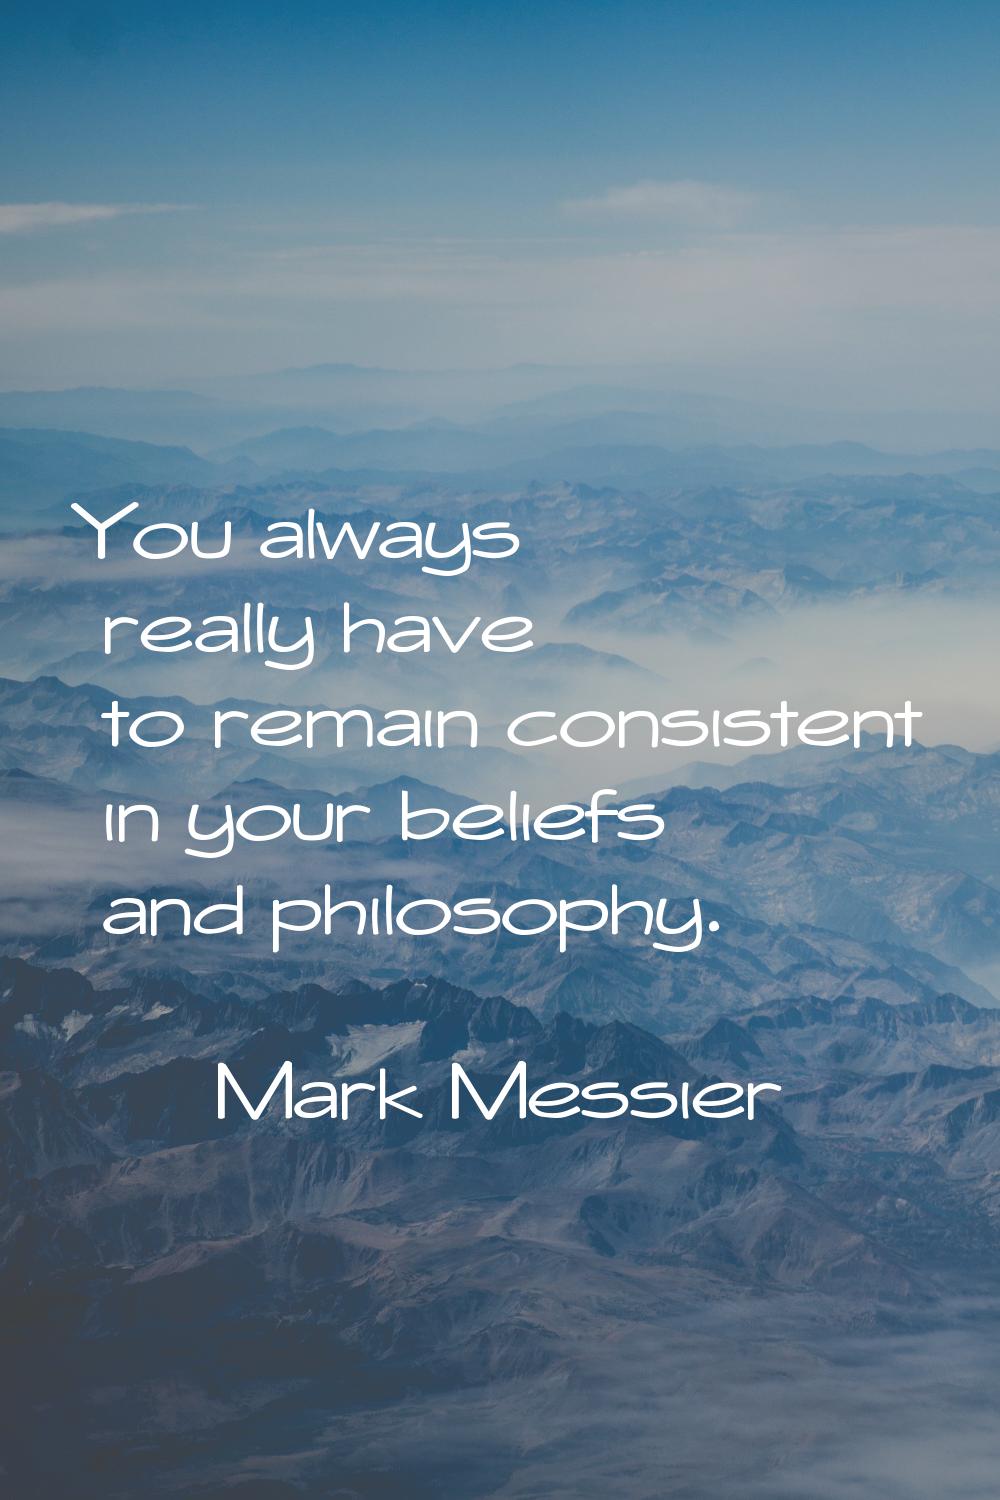 You always really have to remain consistent in your beliefs and philosophy.